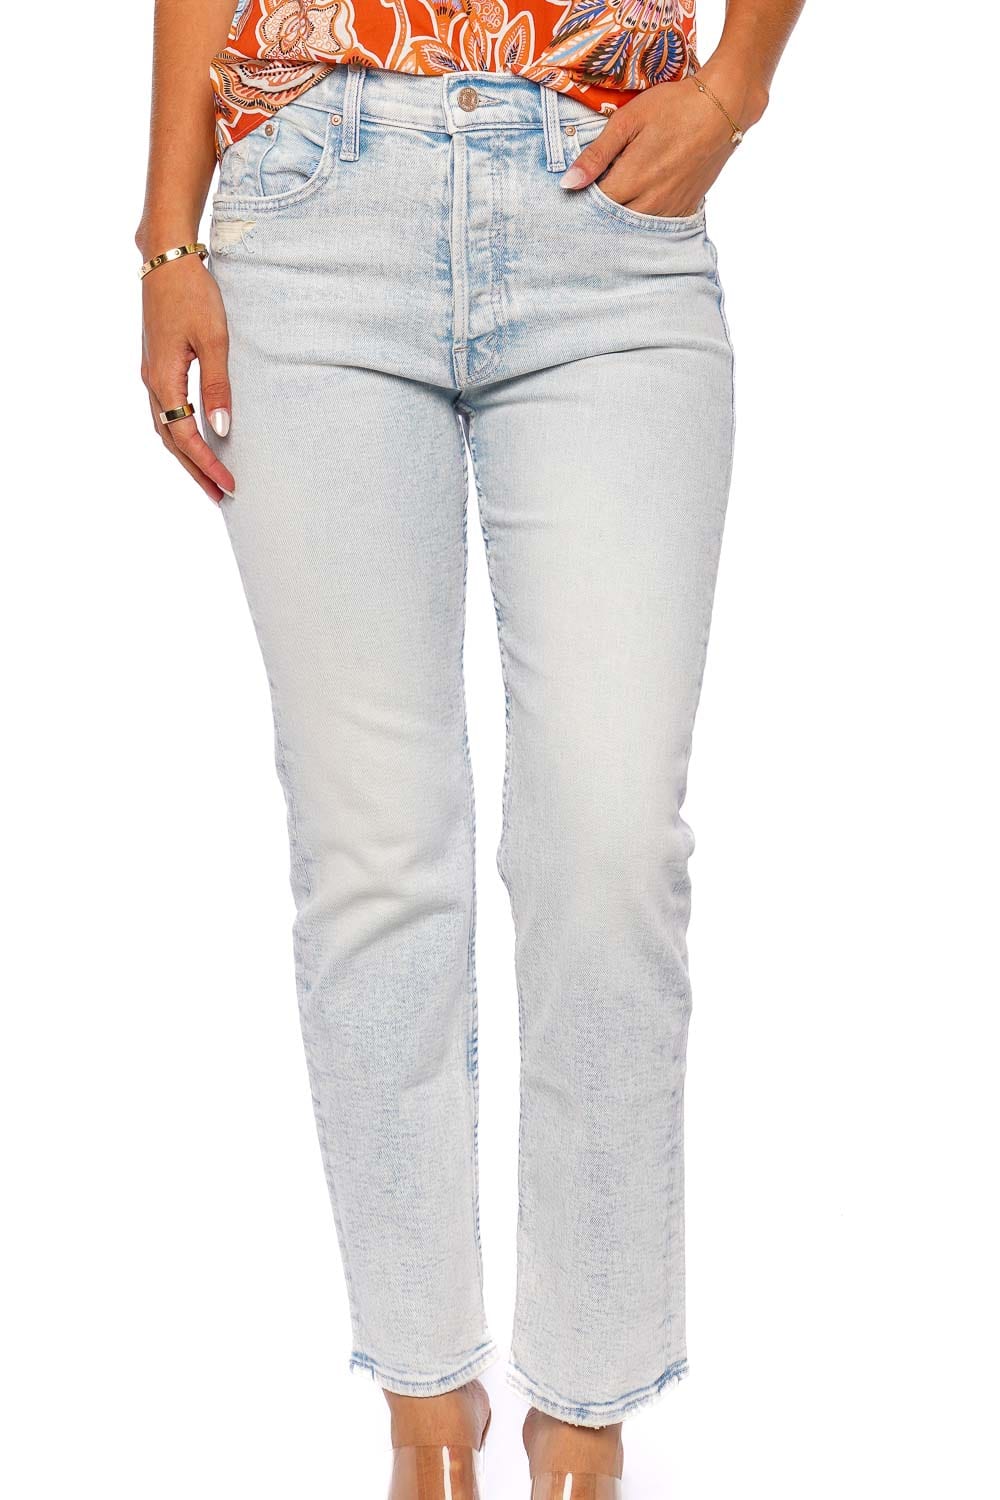 MOTHER Denim The Tomcat Smooth Sailing Ankle Jeans